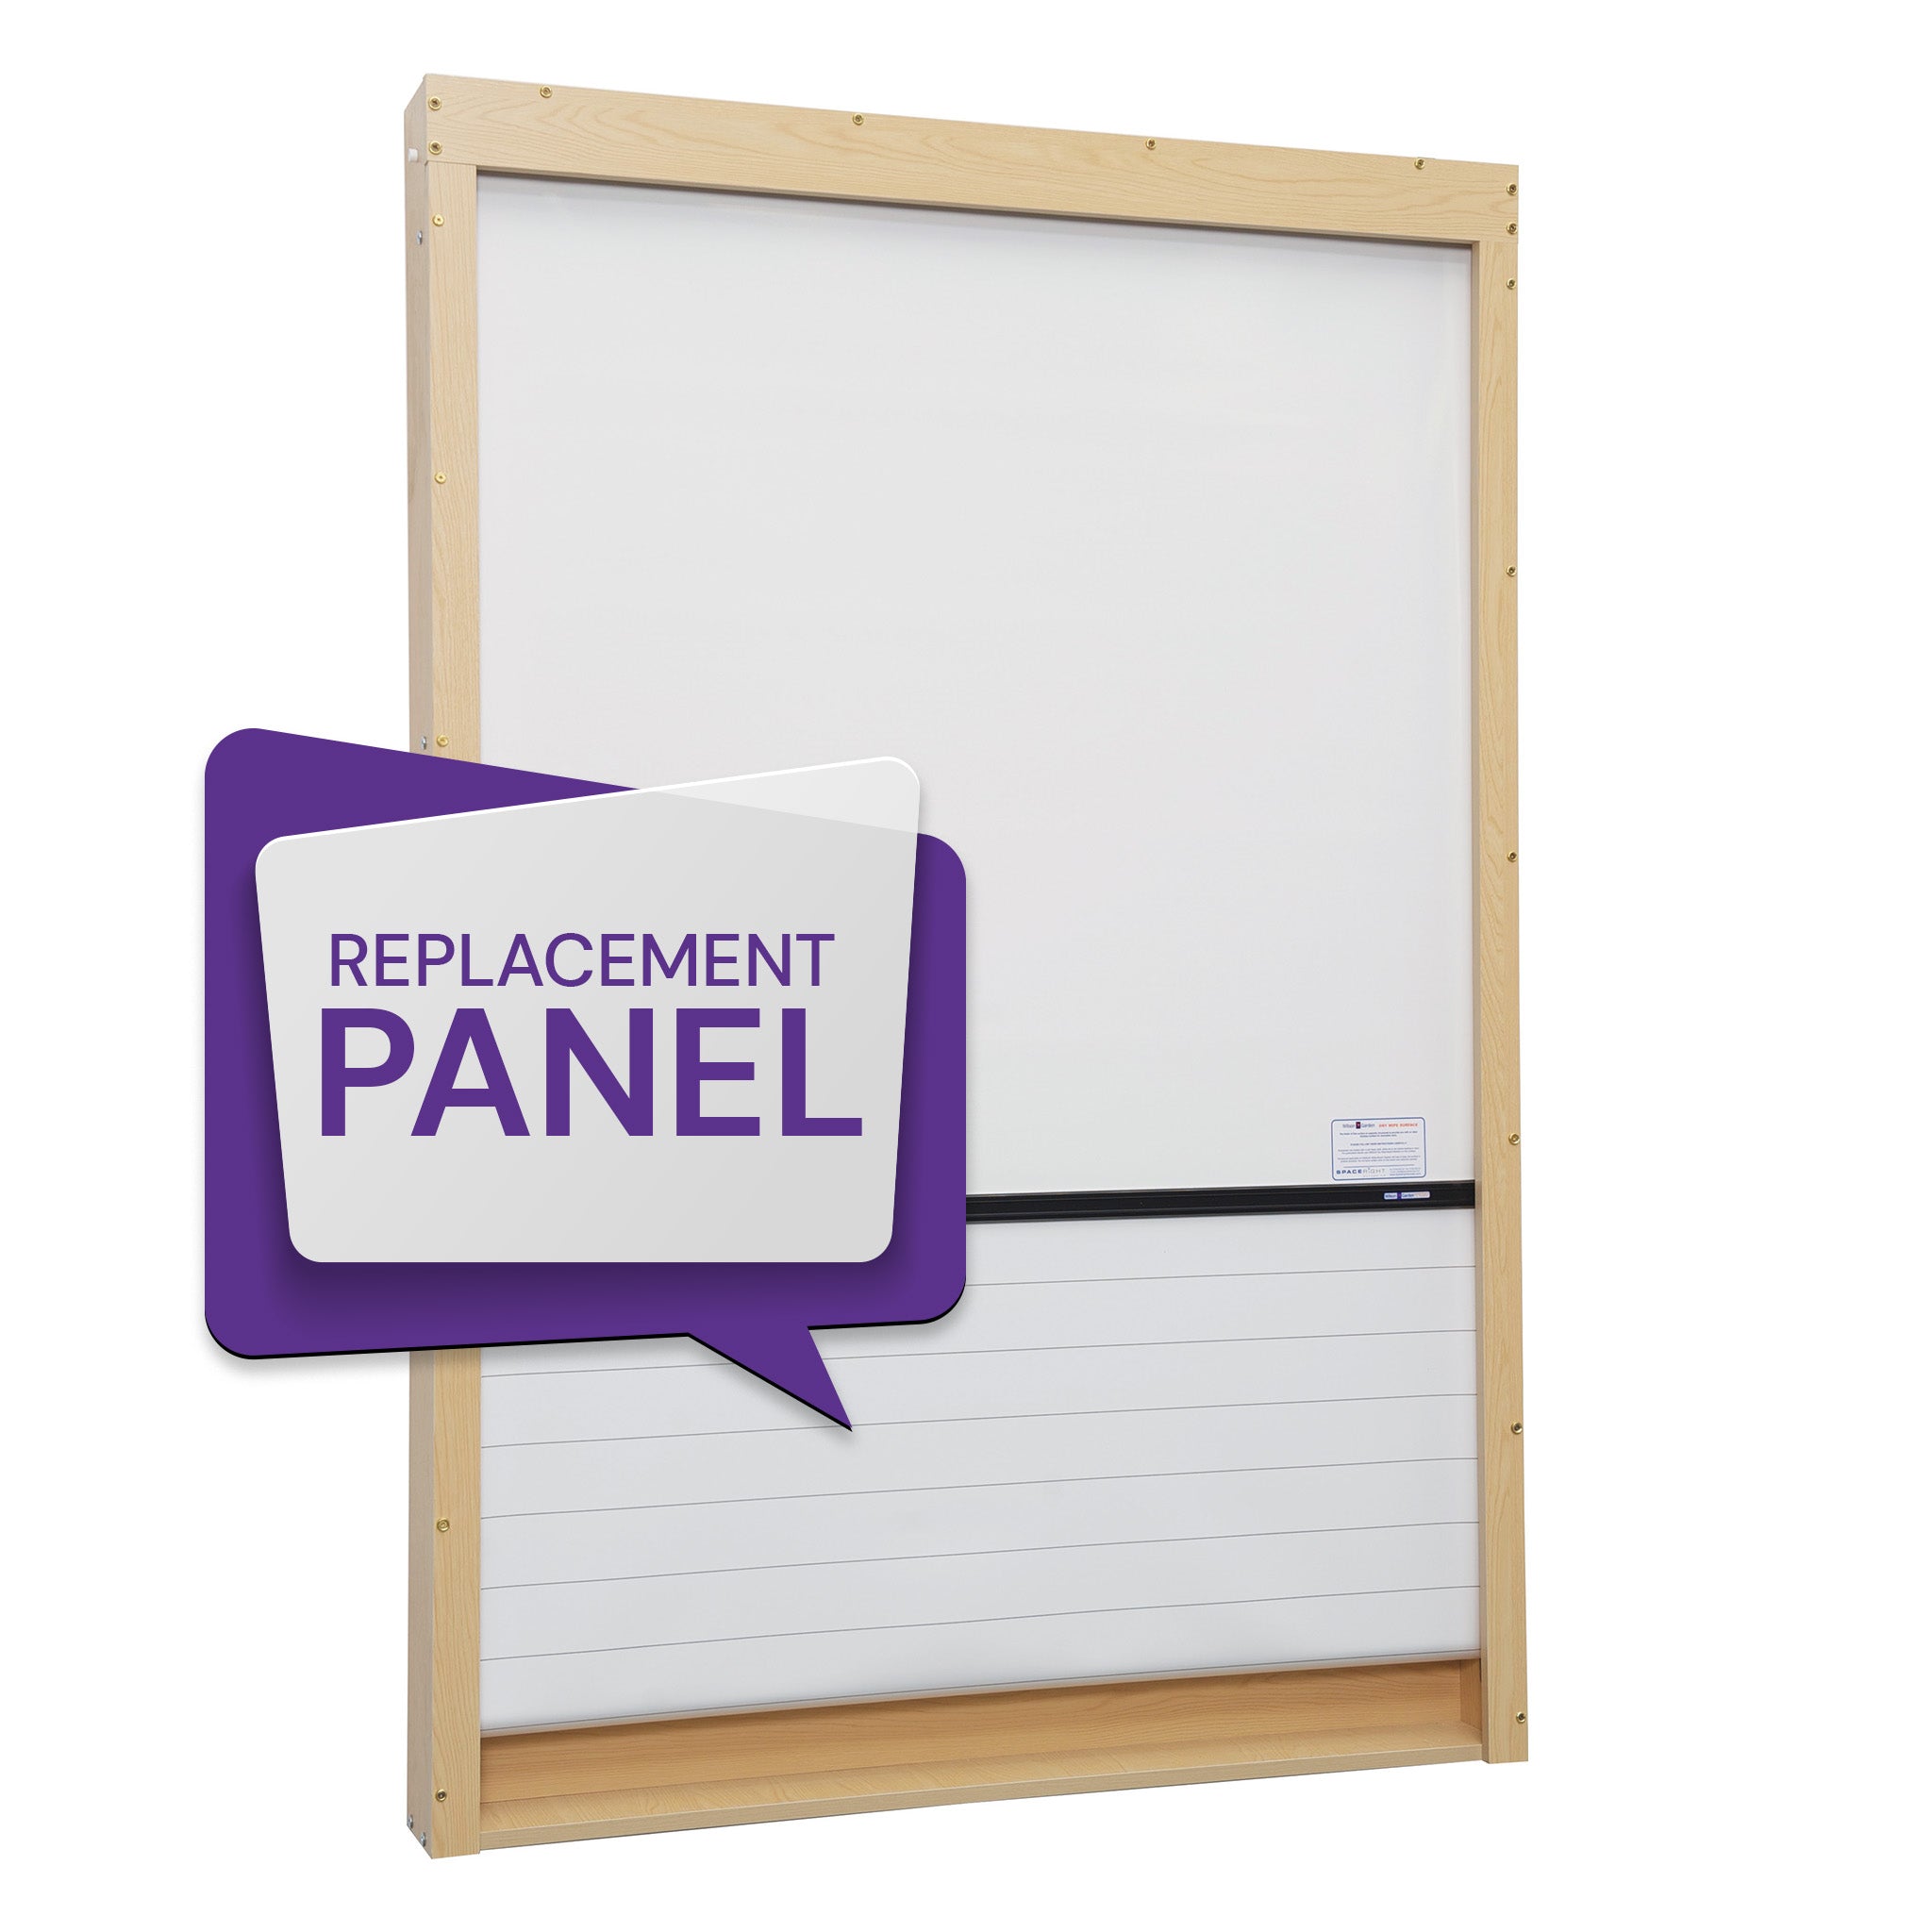 Replacement Panel | Wall Mounted Rollerboard | 1800 W x 1200 H